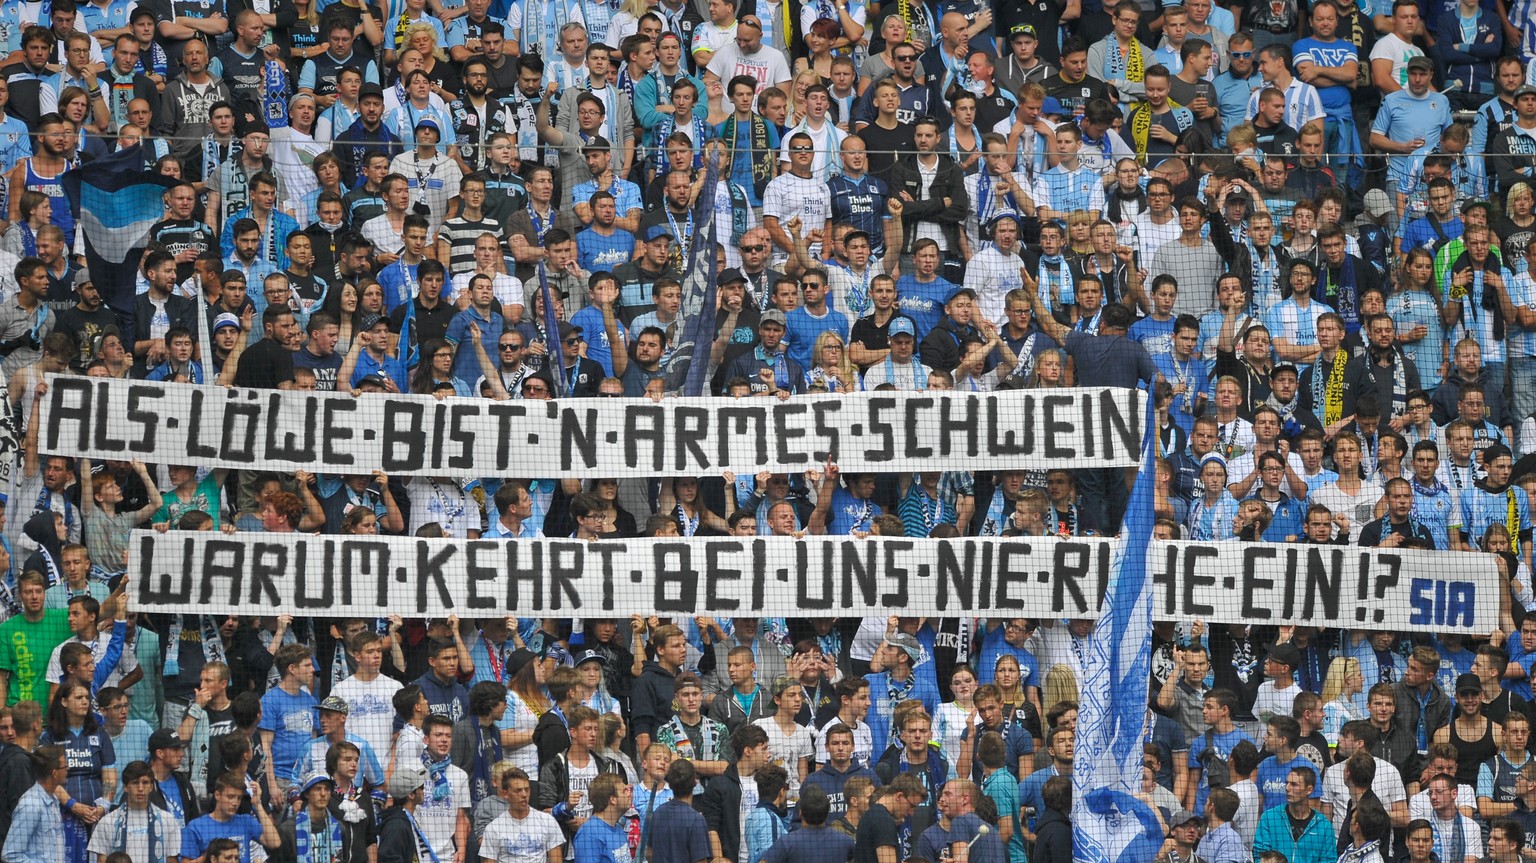 MUNICH, GERMANY - AUGUST 01: Fans of TSV 1860 Muenchen display a banner during the 2. Bundesliga match between TSV 1860 Muenchen and SC Freiburg at Allianz Arena on August 1, 2015 in Munich, Germany.  ...